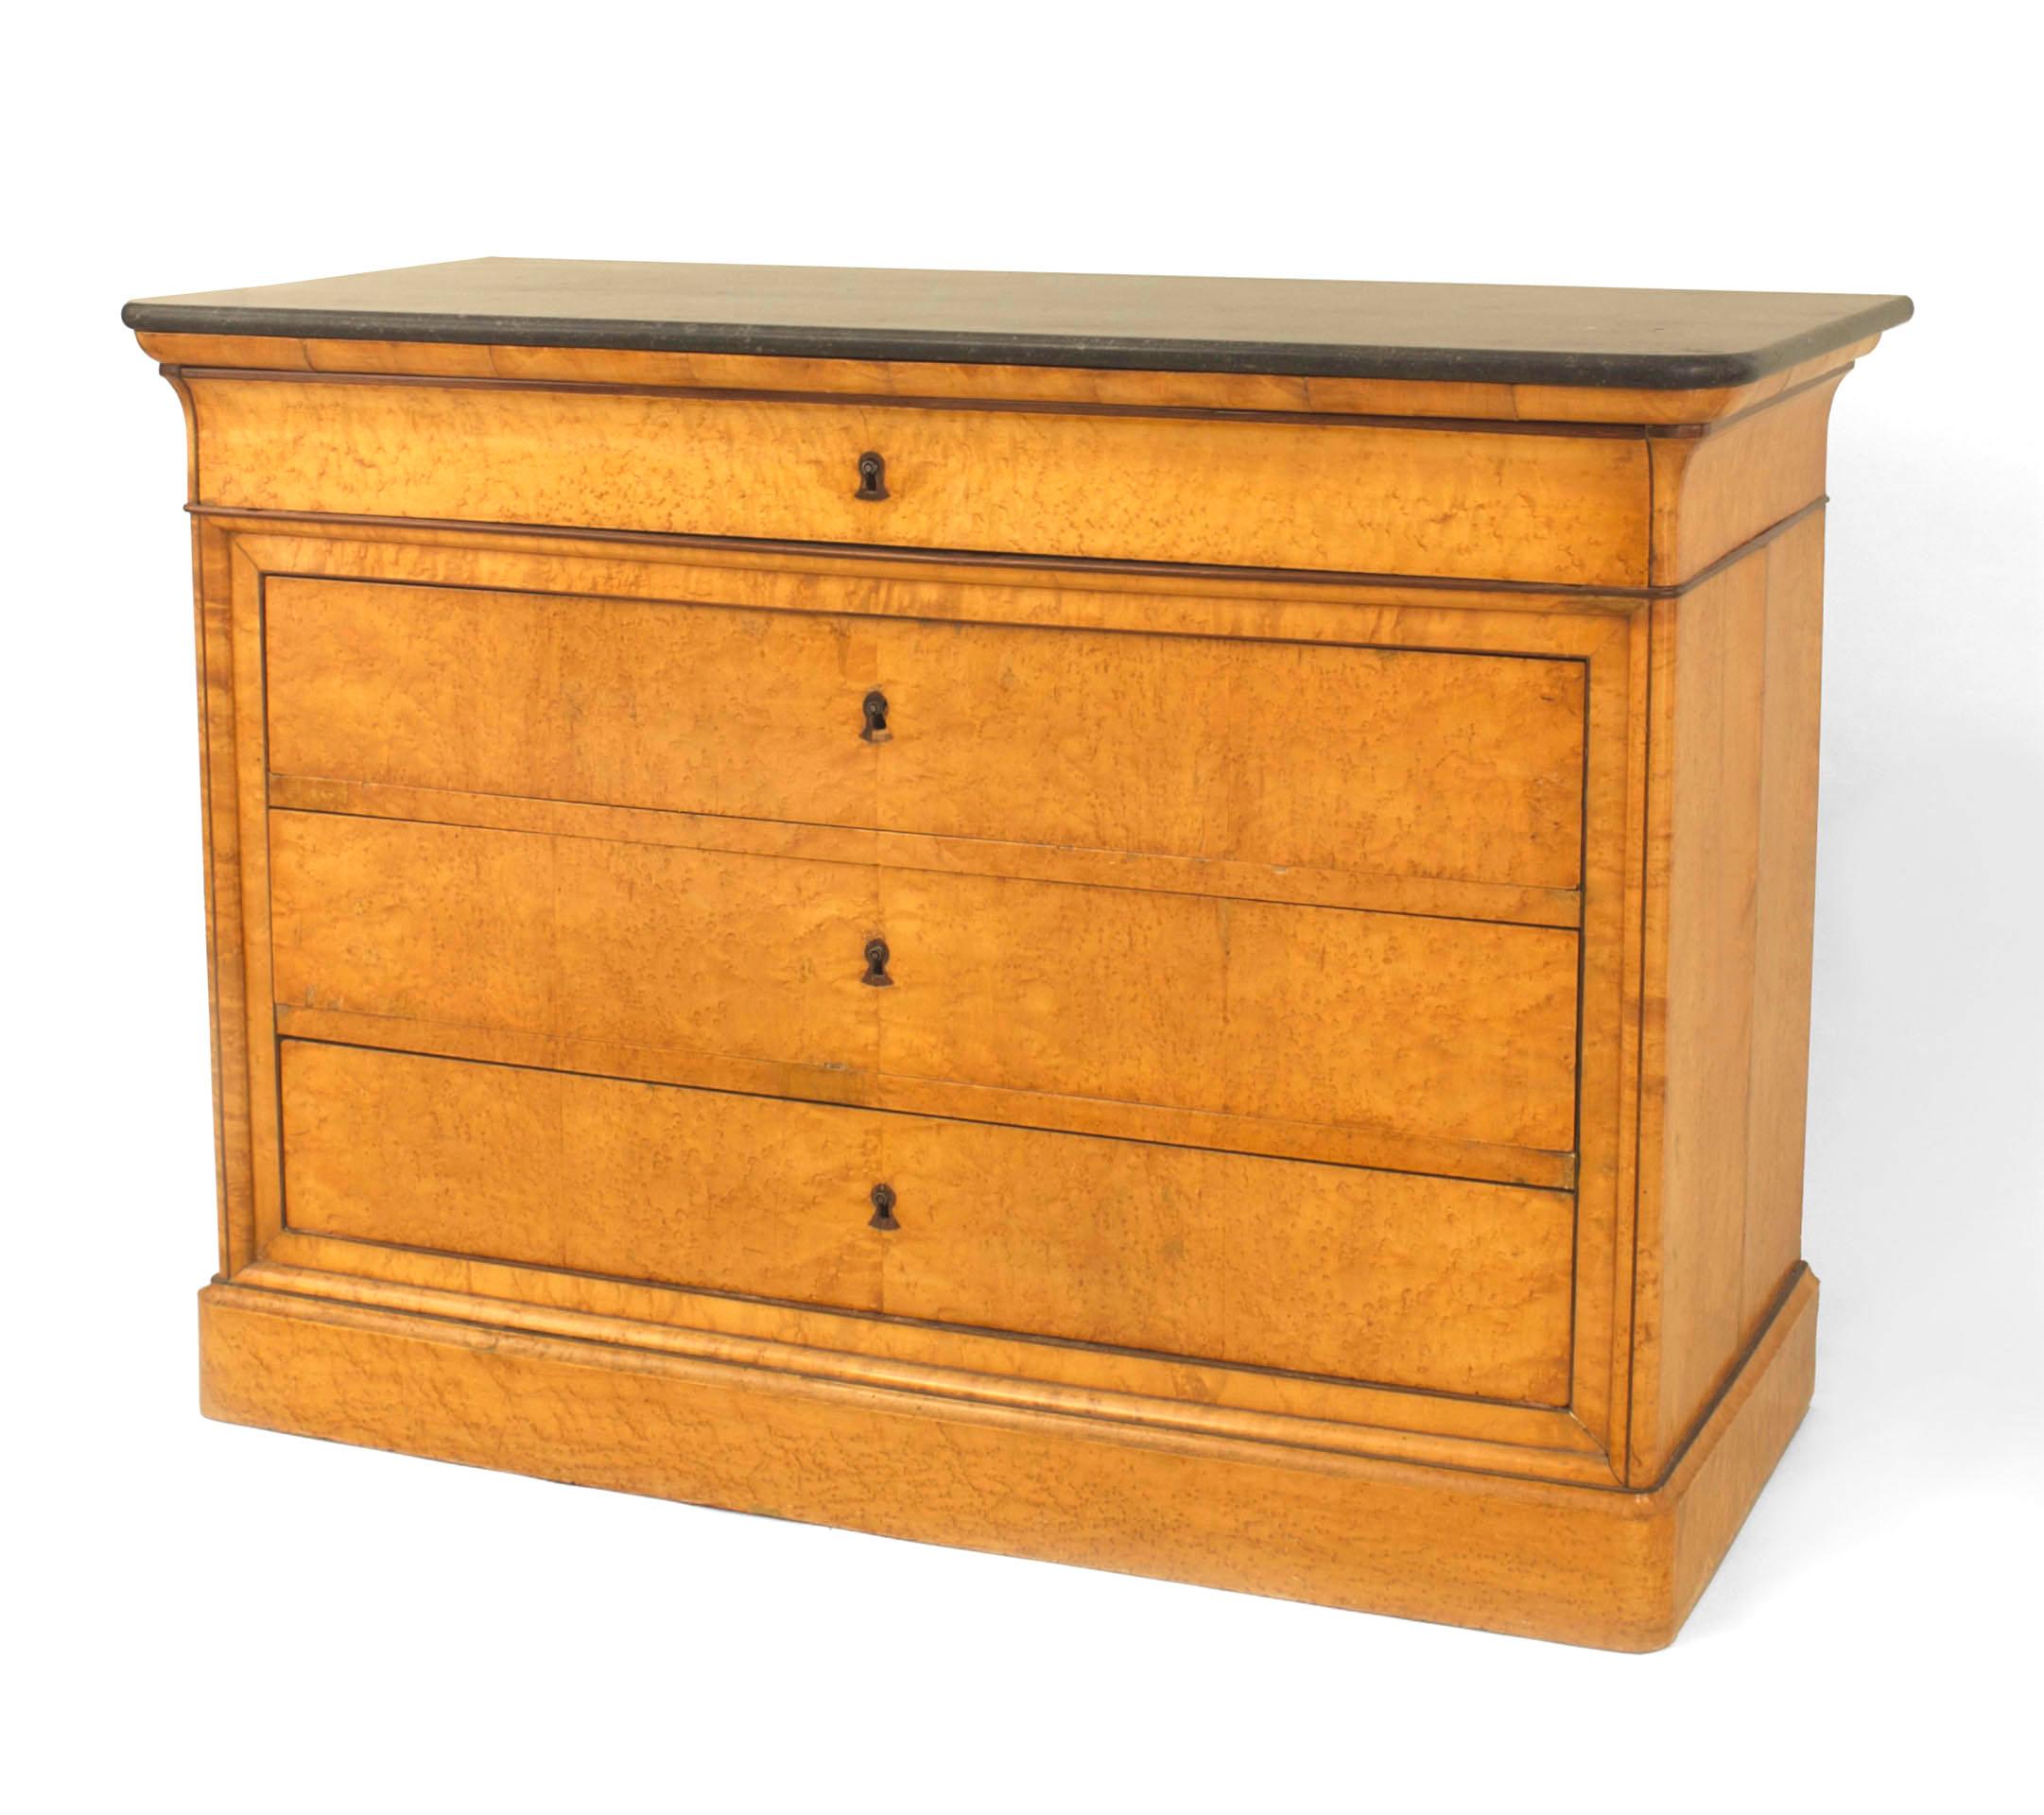 French Charles X (1830s) birds eye maple and mahogany trimmed chest with 4 drawers resting under a black marble top.
